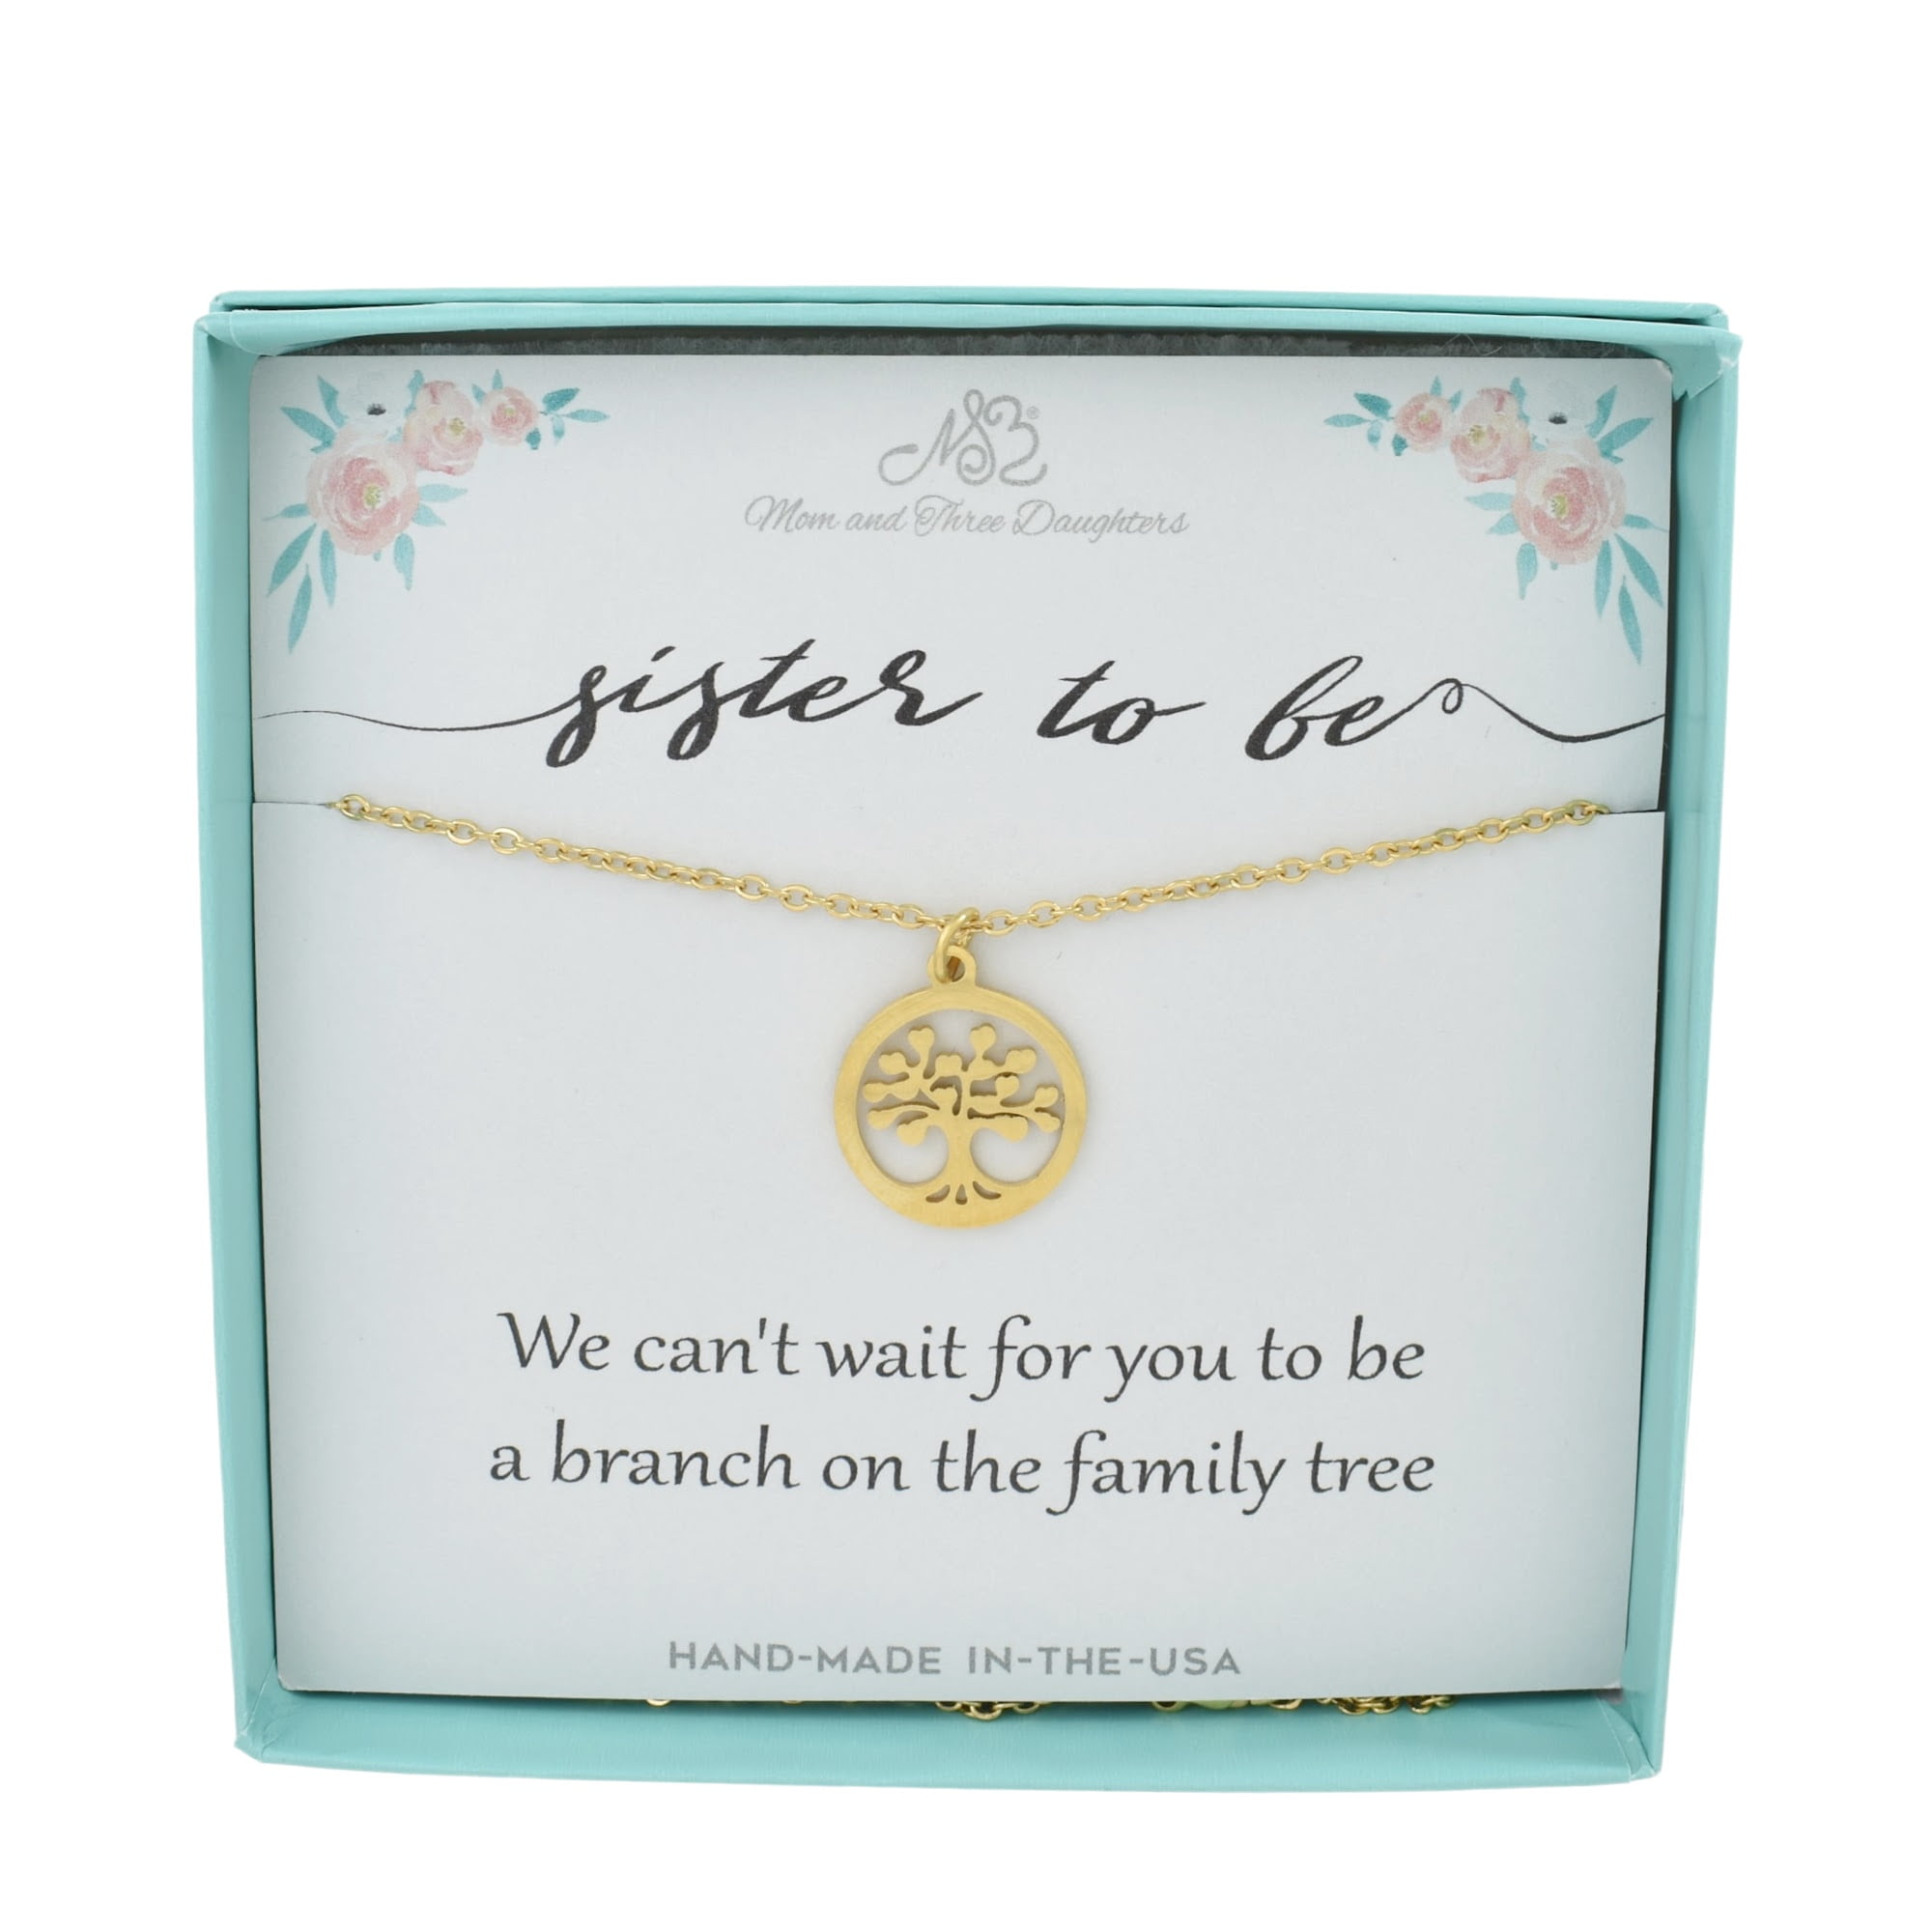 Future Sister In Law Gift Bridal Shower Gift From Sister In Law to Be Tree of Life Pendant Engagement Party Gift Family Tree 18 Chain d36722cd f4a2 490f 9e14 2314e07e1358.0da4ff0ebc3d571eb639e8ce12be3b71